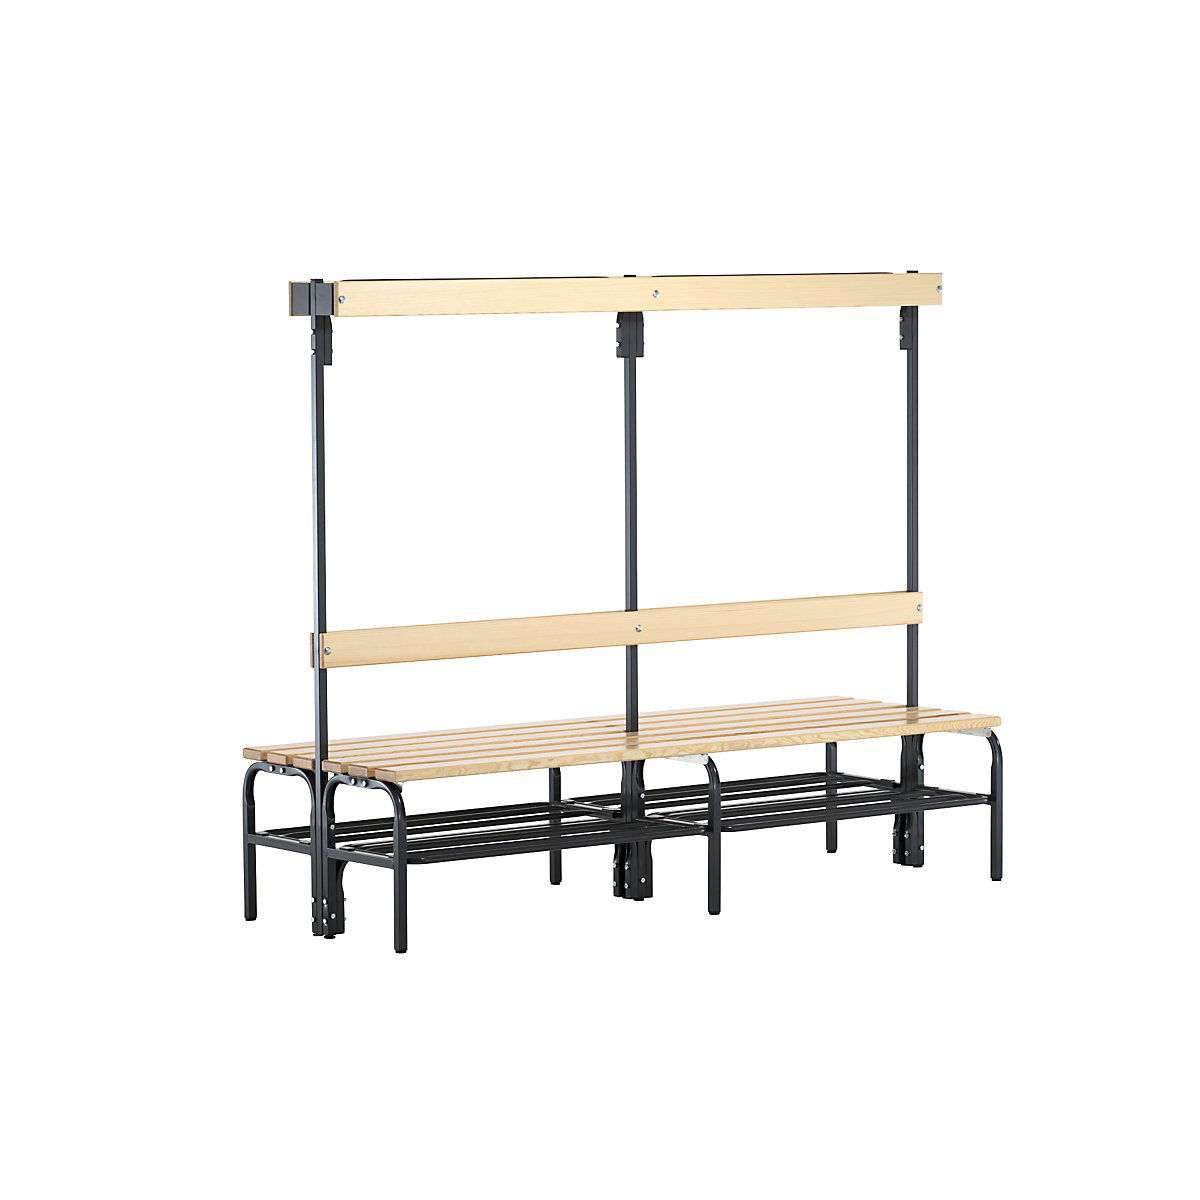 Sypro – Cloakroom bench with hook strips, on both sides, 8 hooks 1500 mm, charcoal, shoe rack